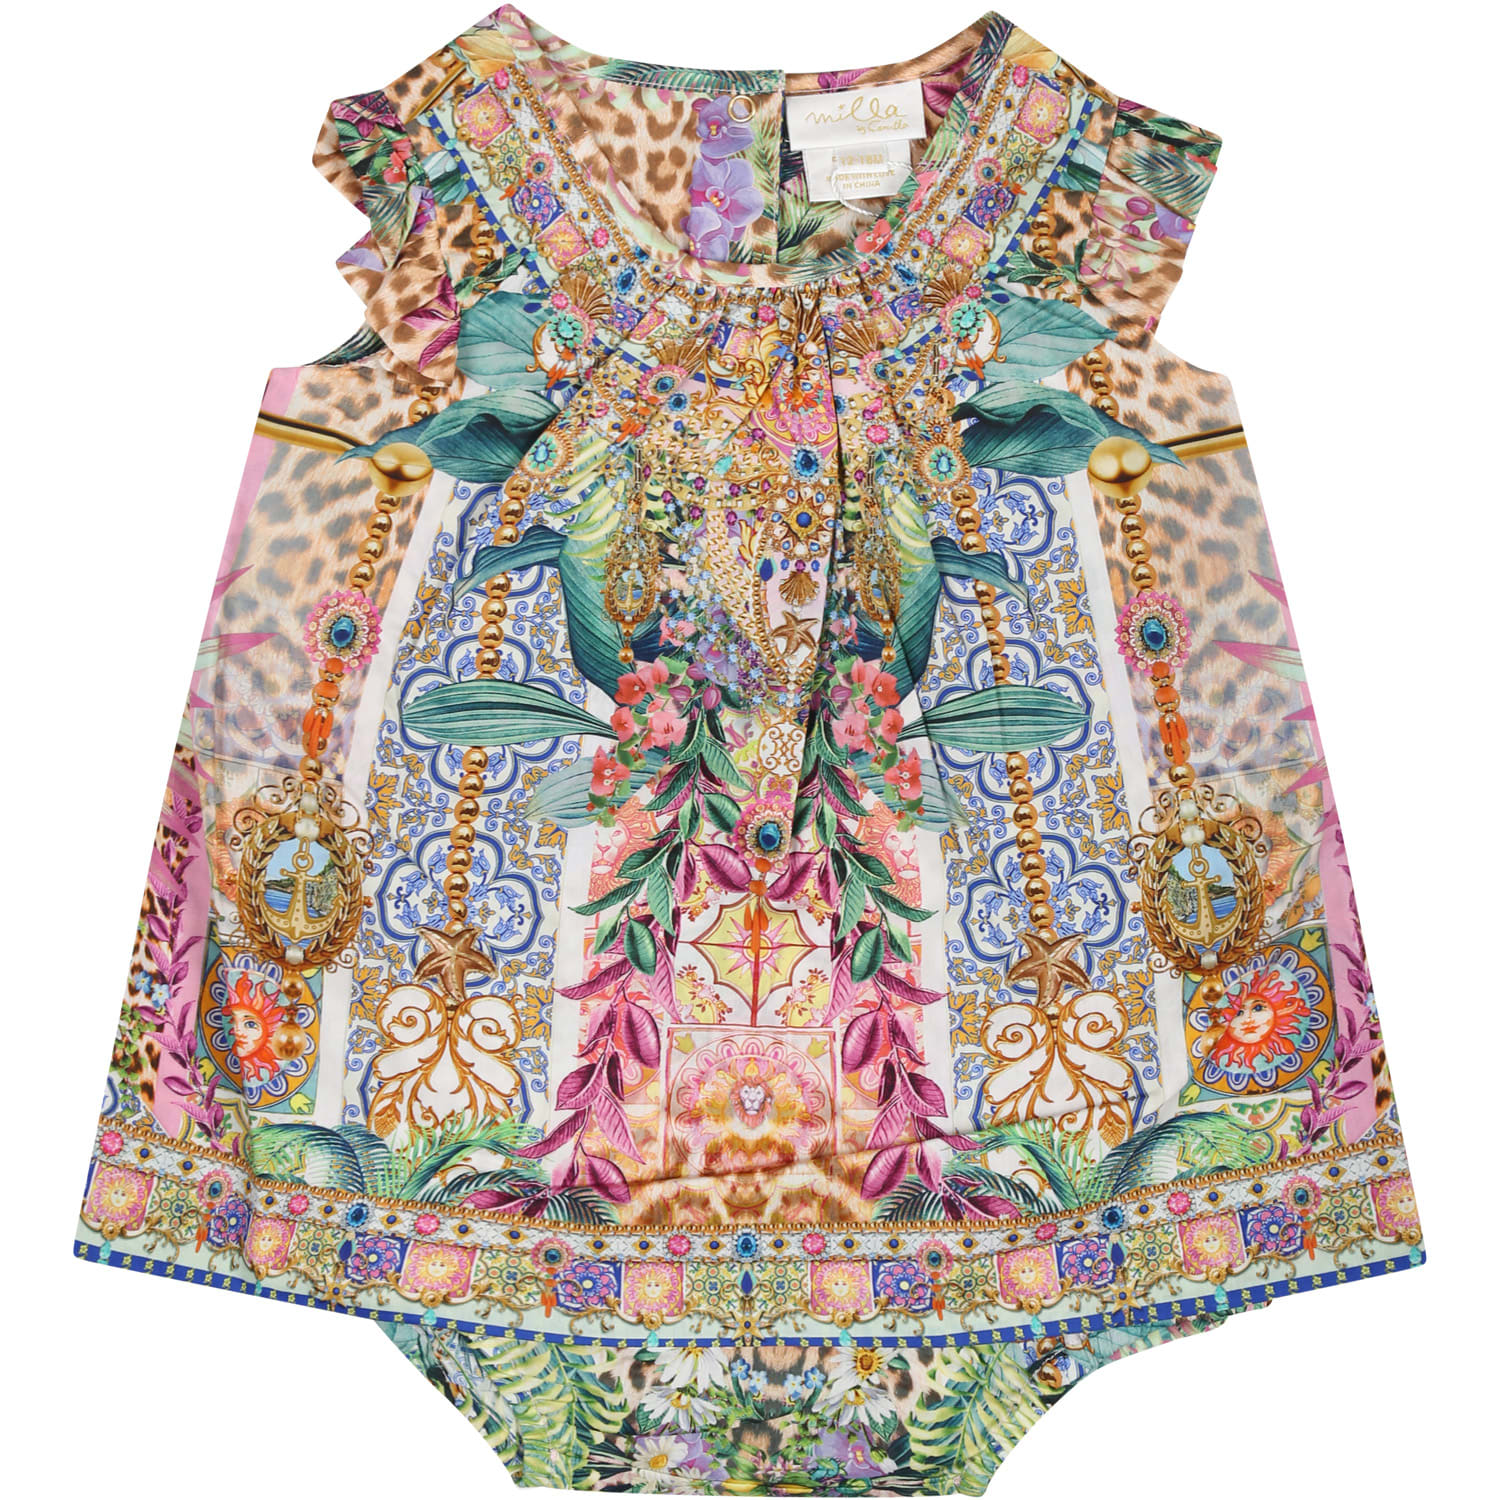 CAMILLA MULTICOLOR DRESS FOR BABY GIRL WITH FLORAL PRINT